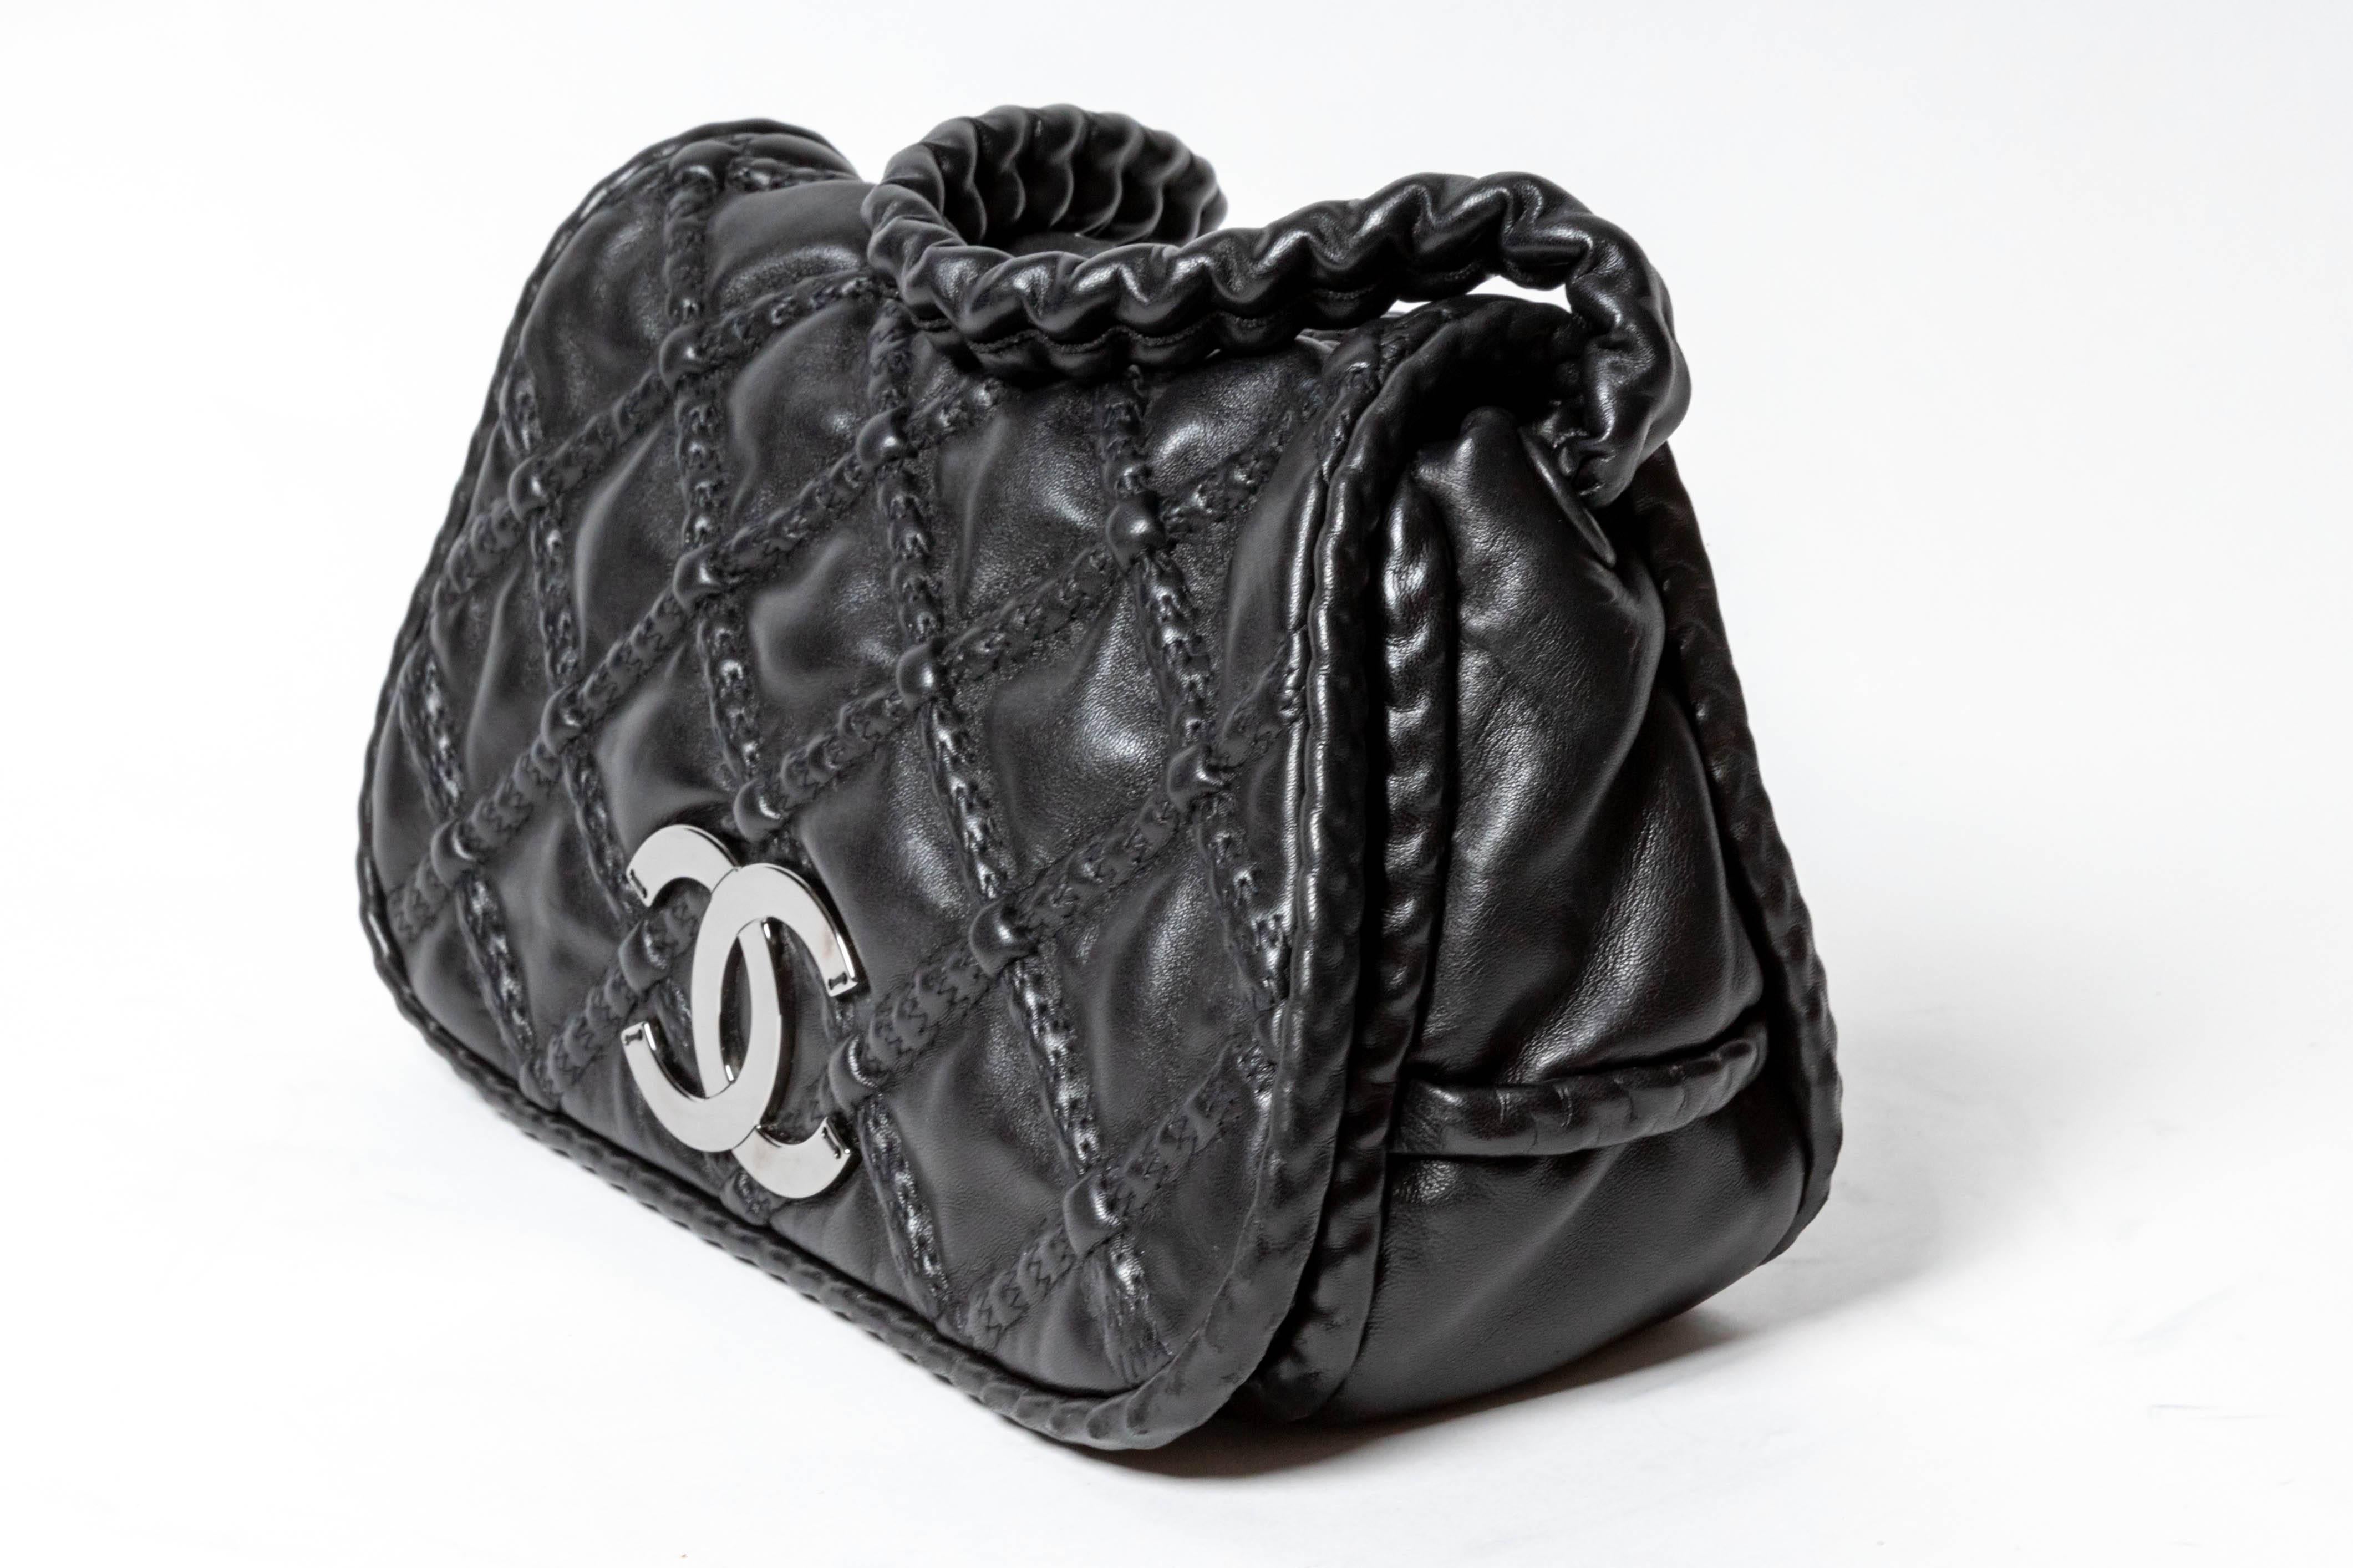 Very chic Chanel bag in excellent condition.
Fabric lining with snap closure and one zip pocket.
Comes with Chanel dustbag.
Measures 12 inches x 7 inches with a strap drop of 6 inches.
Faint scratches to hardware.